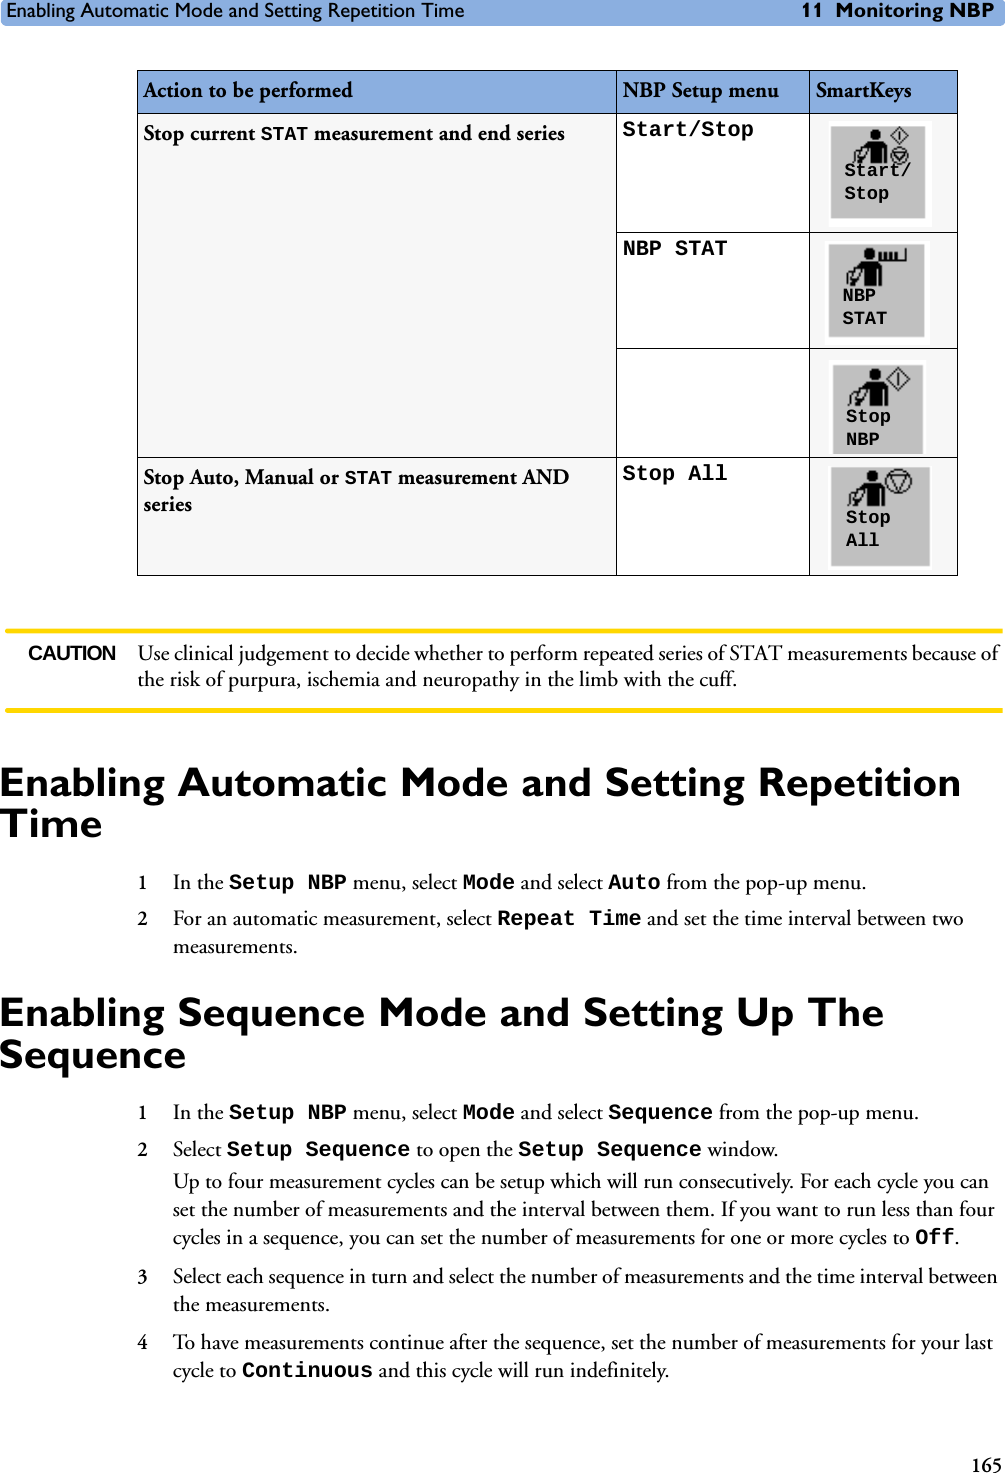 Enabling Automatic Mode and Setting Repetition Time 11 Monitoring NBP165CAUTION Use clinical judgement to decide whether to perform repeated series of STAT measurements because of the risk of purpura, ischemia and neuropathy in the limb with the cuff.Enabling Automatic Mode and Setting Repetition Time1In the Setup NBP menu, select Mode and select Auto from the pop-up menu.2For an automatic measurement, select Repeat Time and set the time interval between two measurements.Enabling Sequence Mode and Setting Up The Sequence1In the Setup NBP menu, select Mode and select Sequence from the pop-up menu.2Select Setup Sequence to open the Setup Sequence window.Up to four measurement cycles can be setup which will run consecutively. For each cycle you can set the number of measurements and the interval between them. If you want to run less than four cycles in a sequence, you can set the number of measurements for one or more cycles to Off. 3Select each sequence in turn and select the number of measurements and the time interval between the measurements. 4To have measurements continue after the sequence, set the number of measurements for your last cycle to Continuous and this cycle will run indefinitely.Stop current STAT measurement and end series Start/StopNBP STATStop Auto, Manual or STAT measurement AND seriesStop AllAction to be performed NBP Setup menu SmartKeysStart/StopNBPSTATStopNBPStopAll